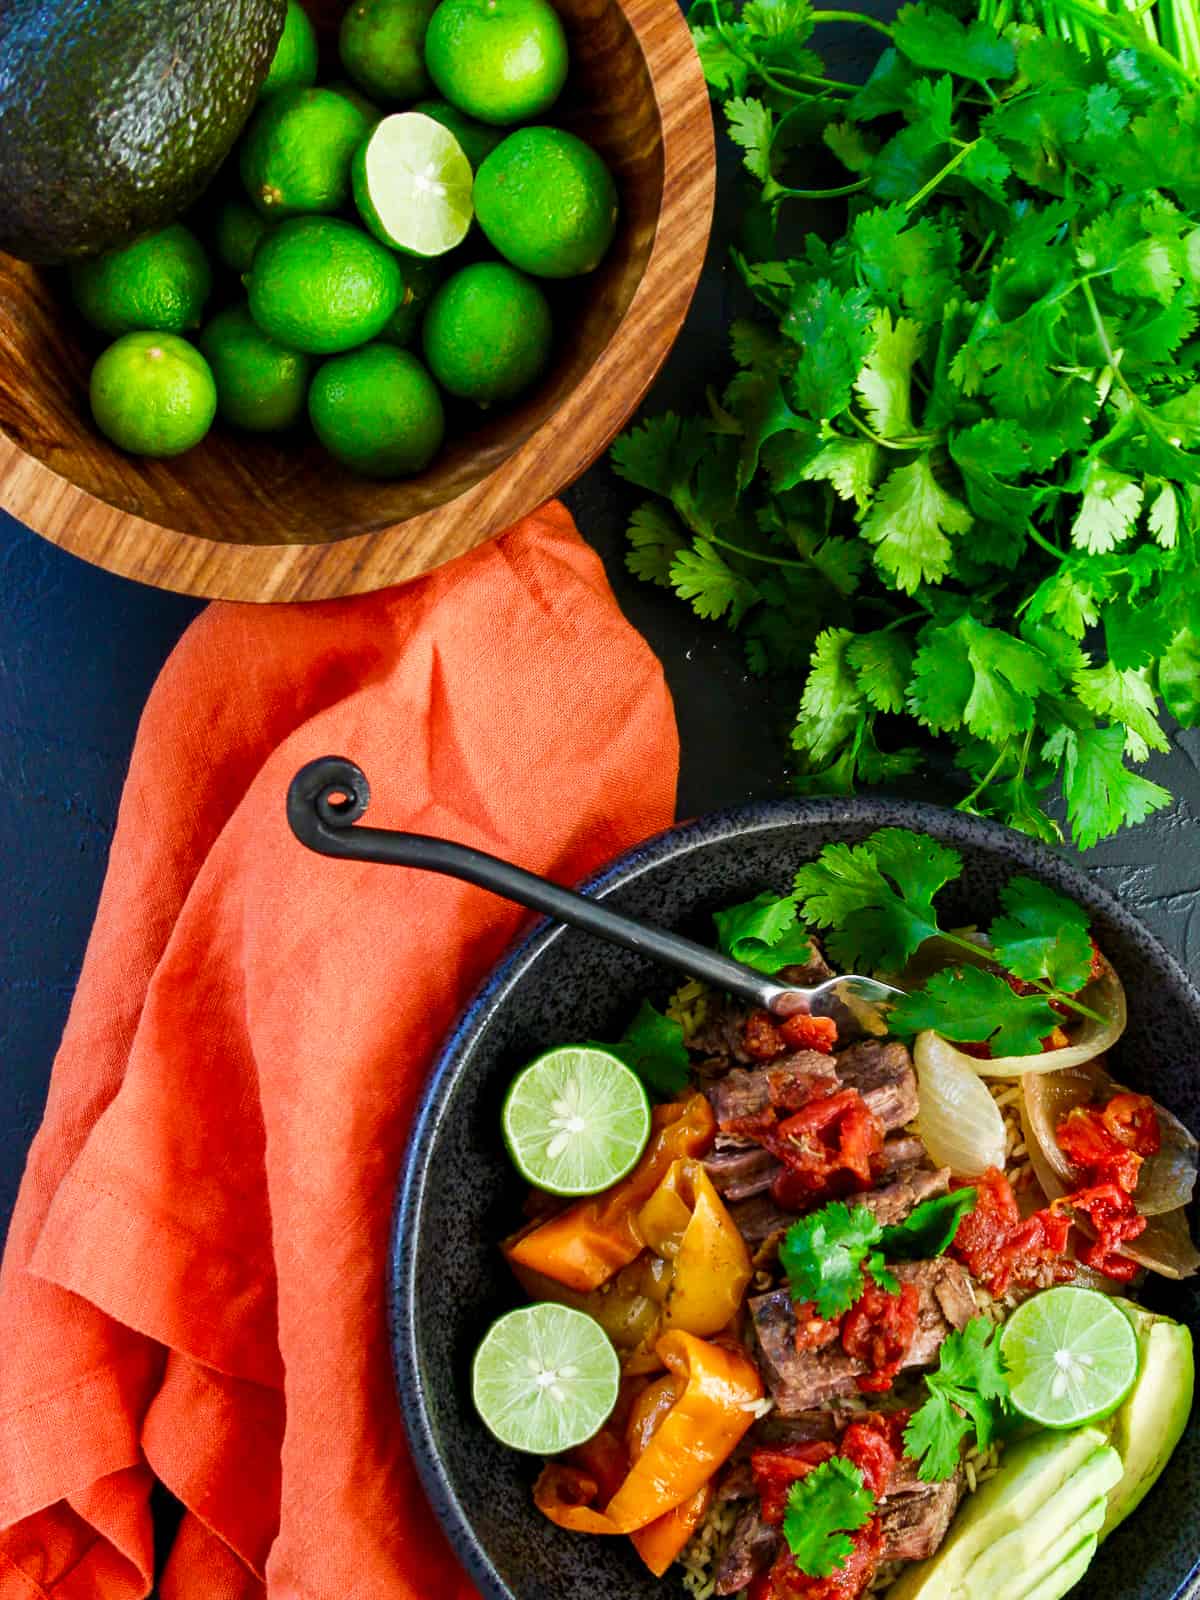 A wood bowl of limes with slow cooker shredded beef topped with cilantro, avocado, and limes.